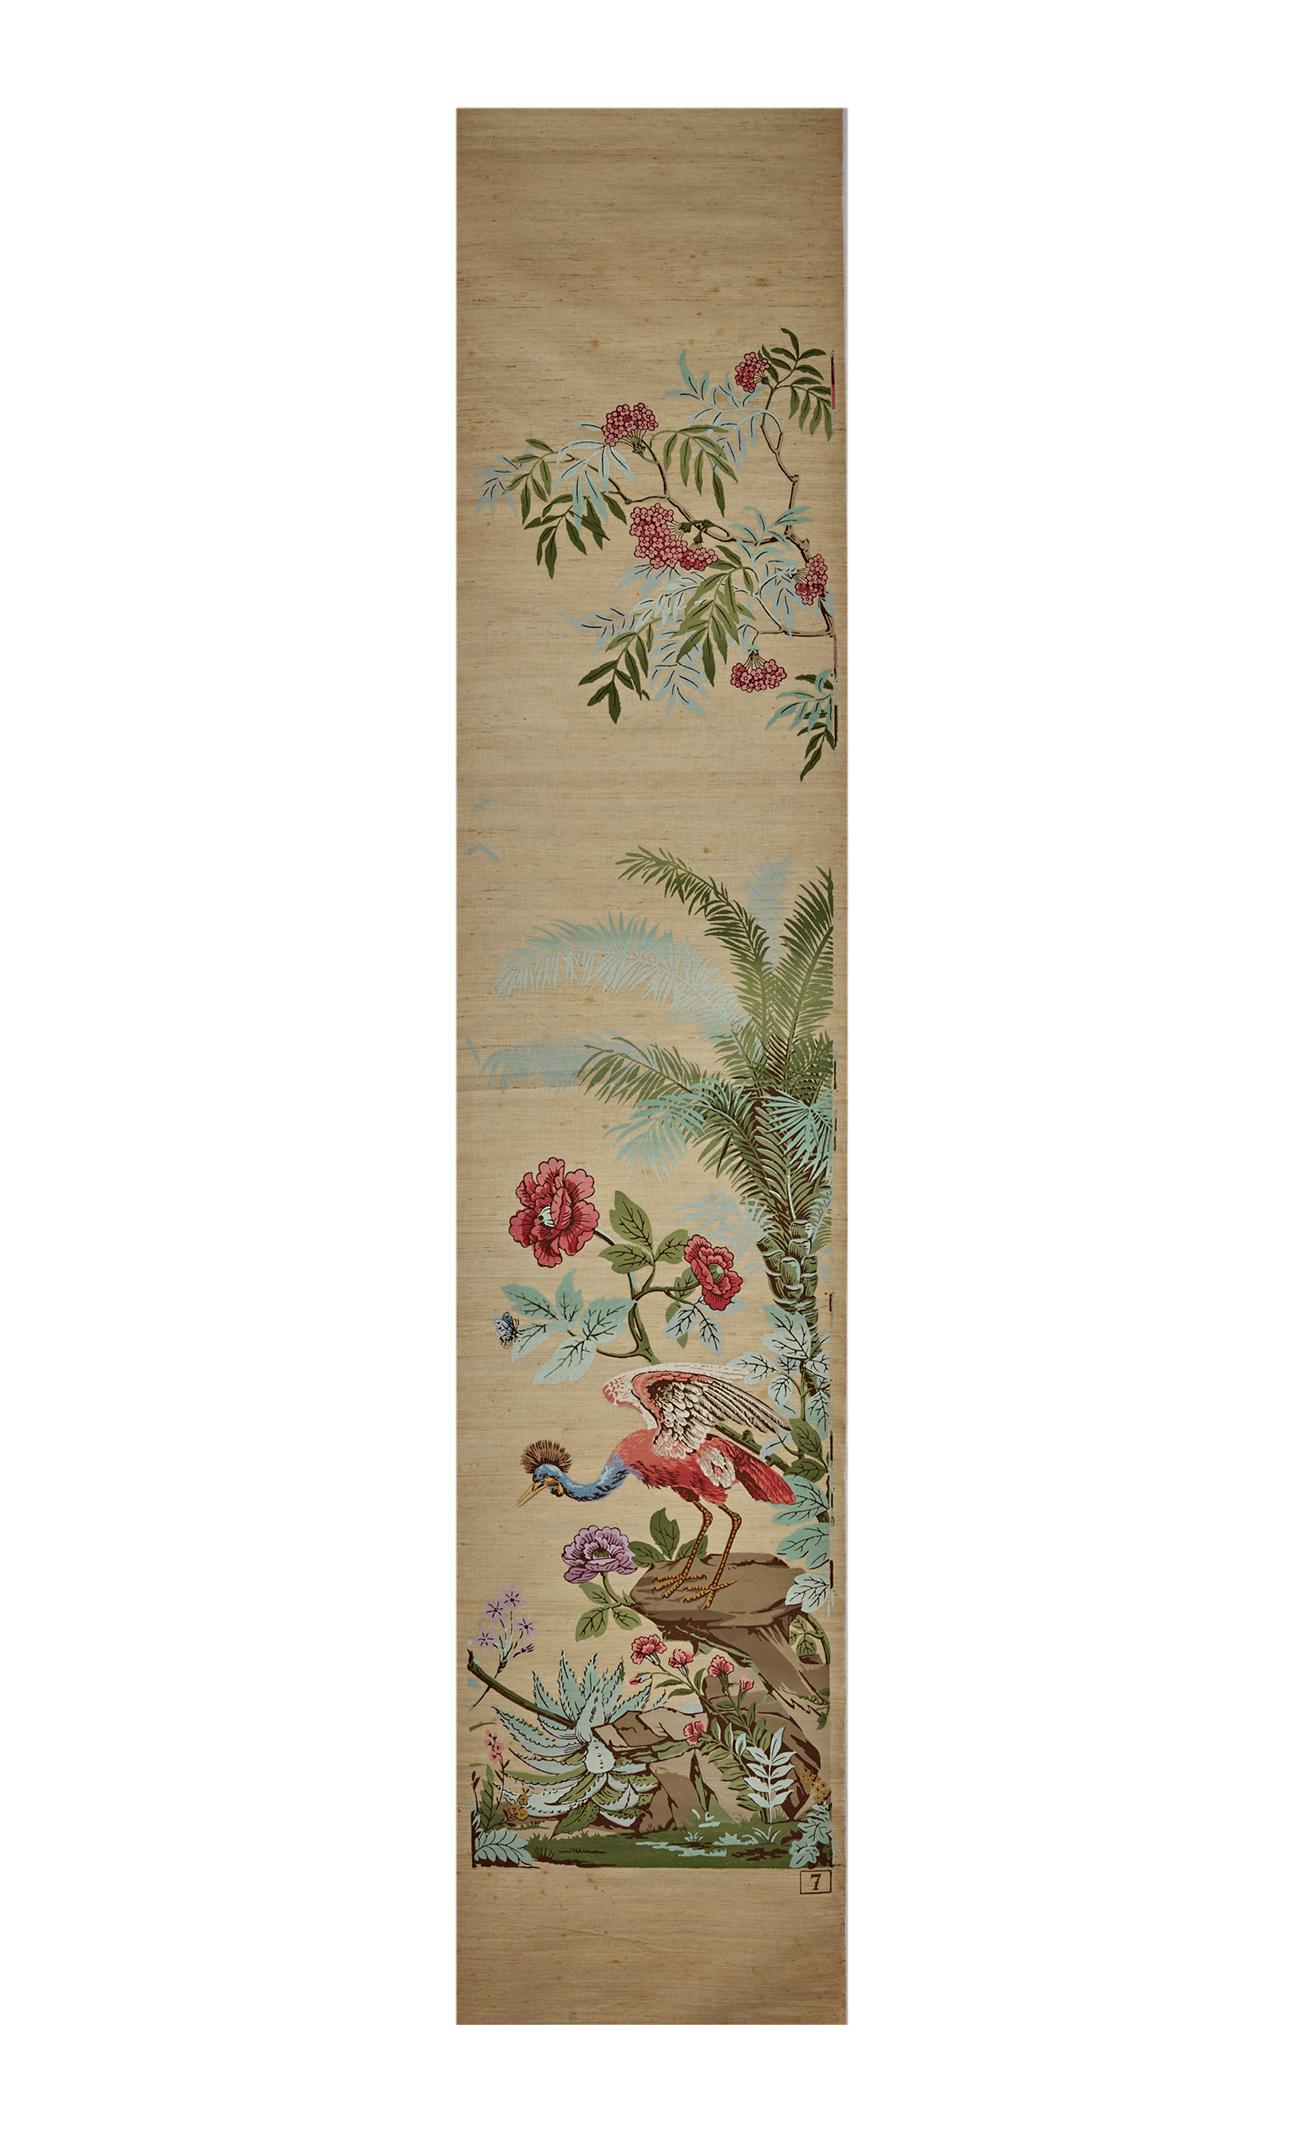 Zuber, 'Decor Chinois' Hand Wood Blocked on Grasscloth Scenic Wallpaper In Good Condition For Sale In Rixheim, FR